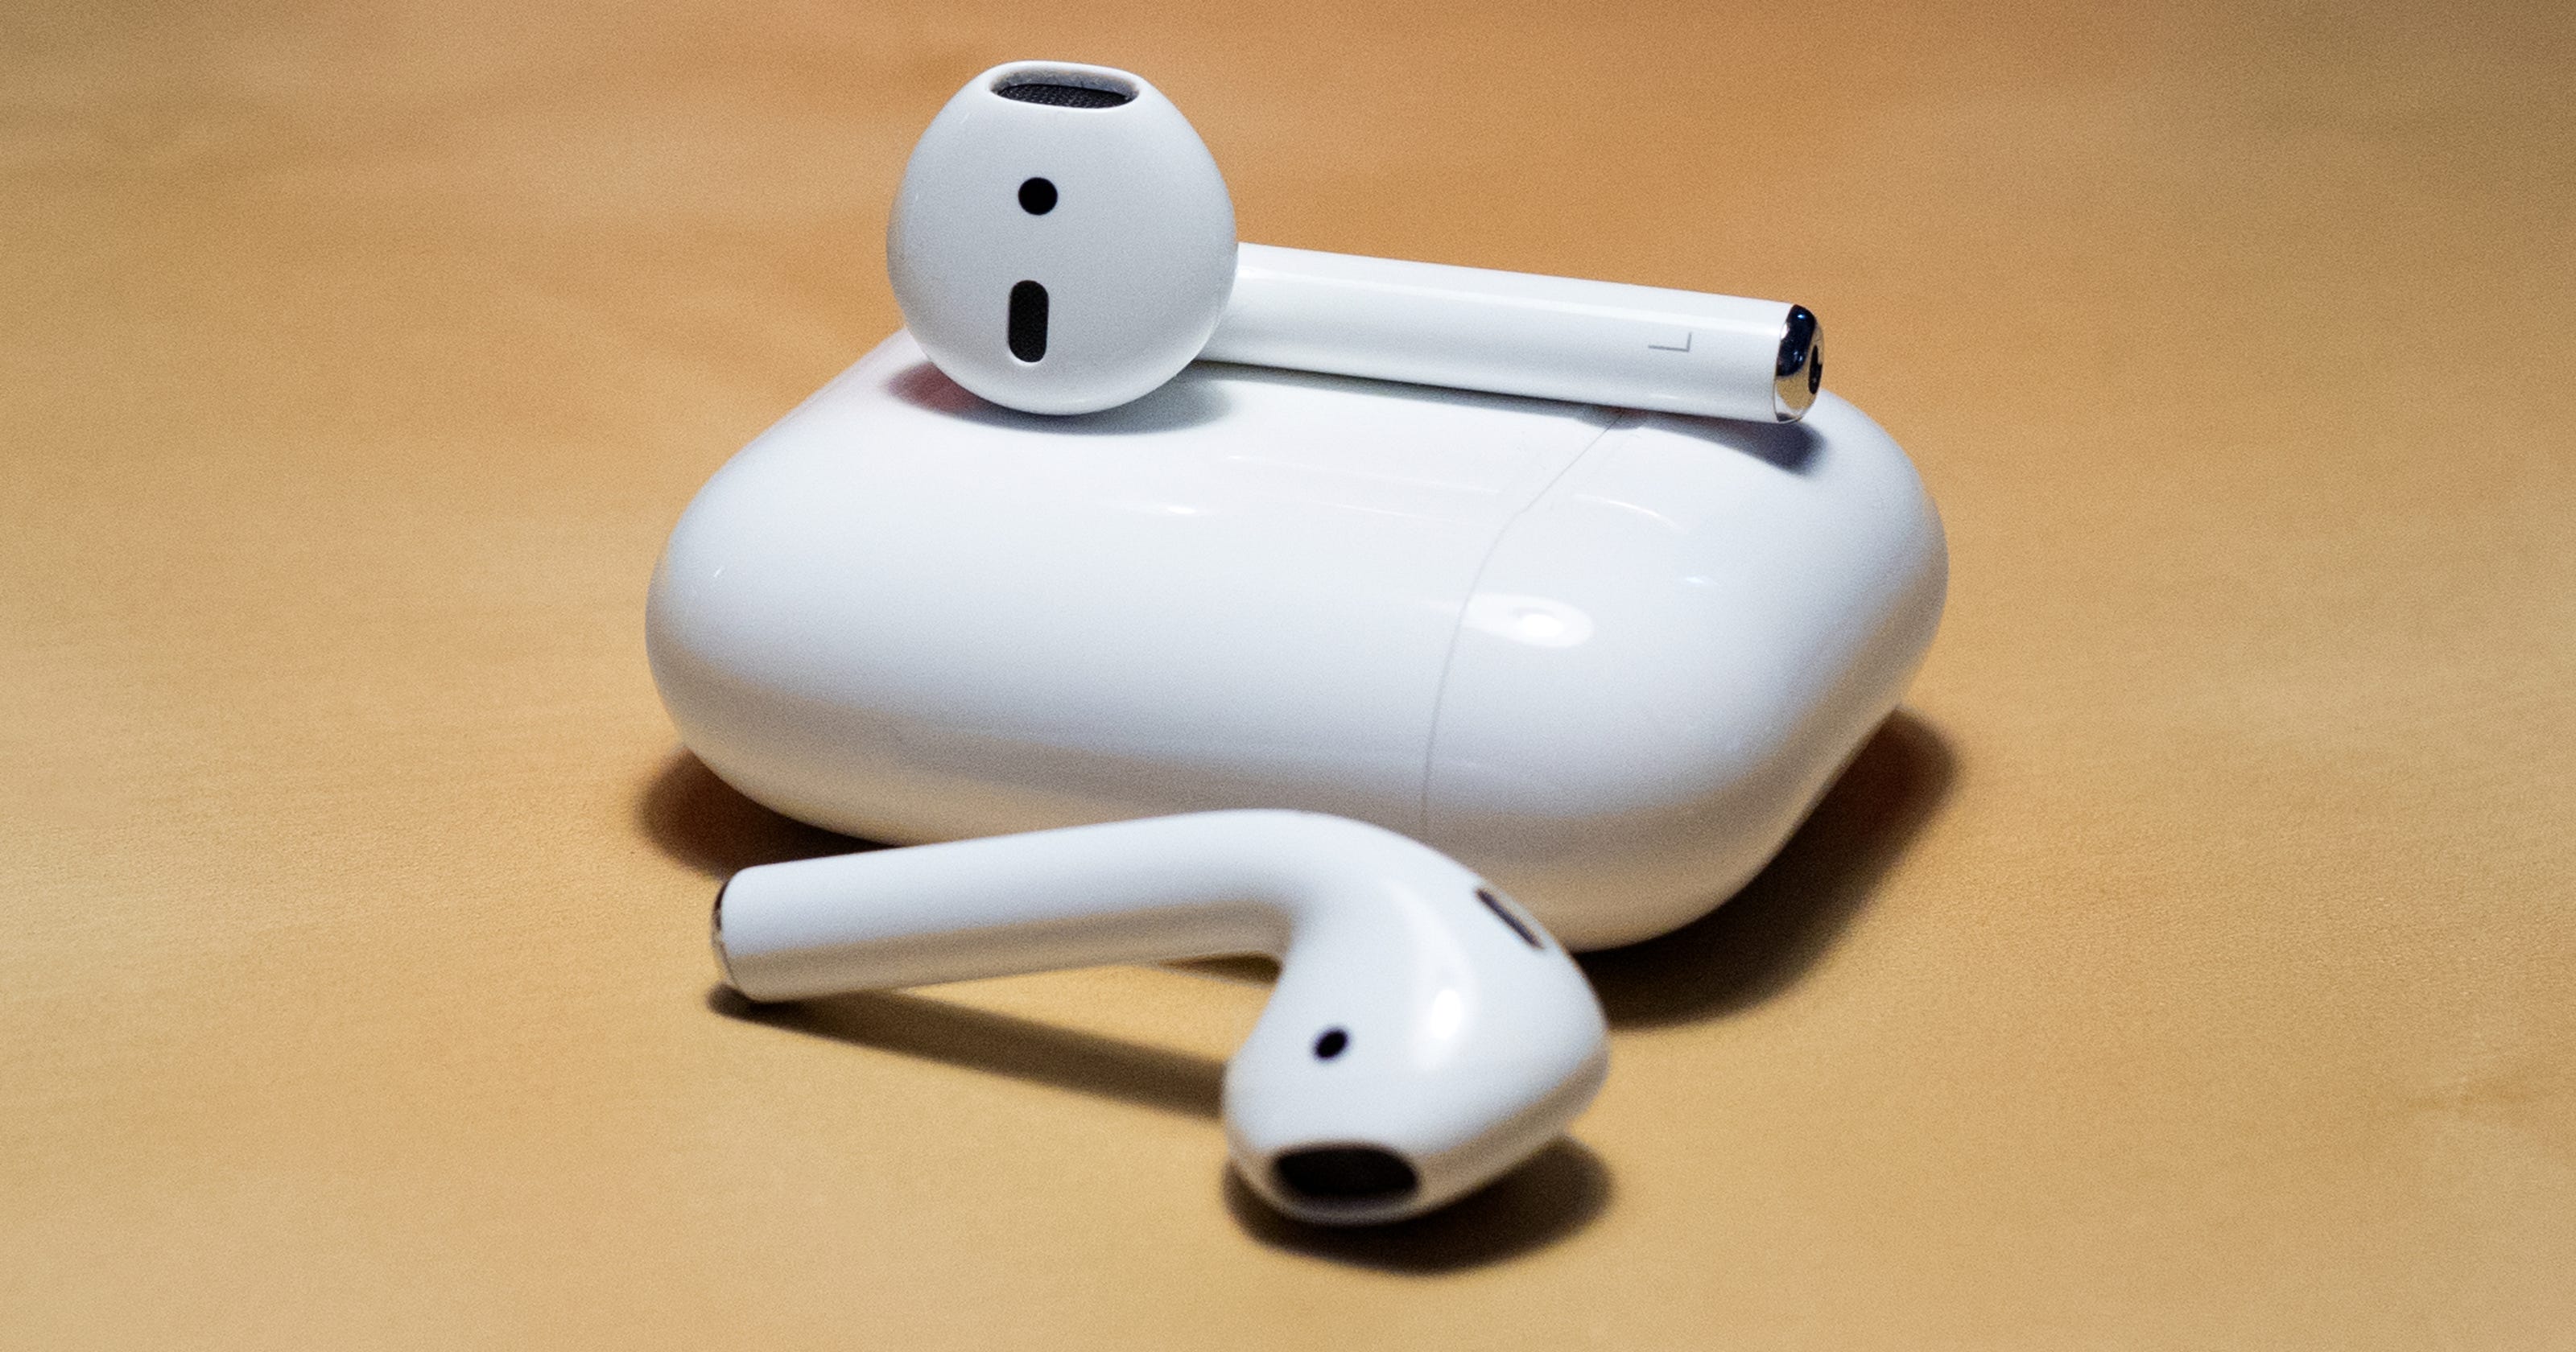 Apple Watch, AirPod prices could rise if Trump China tariffs happen